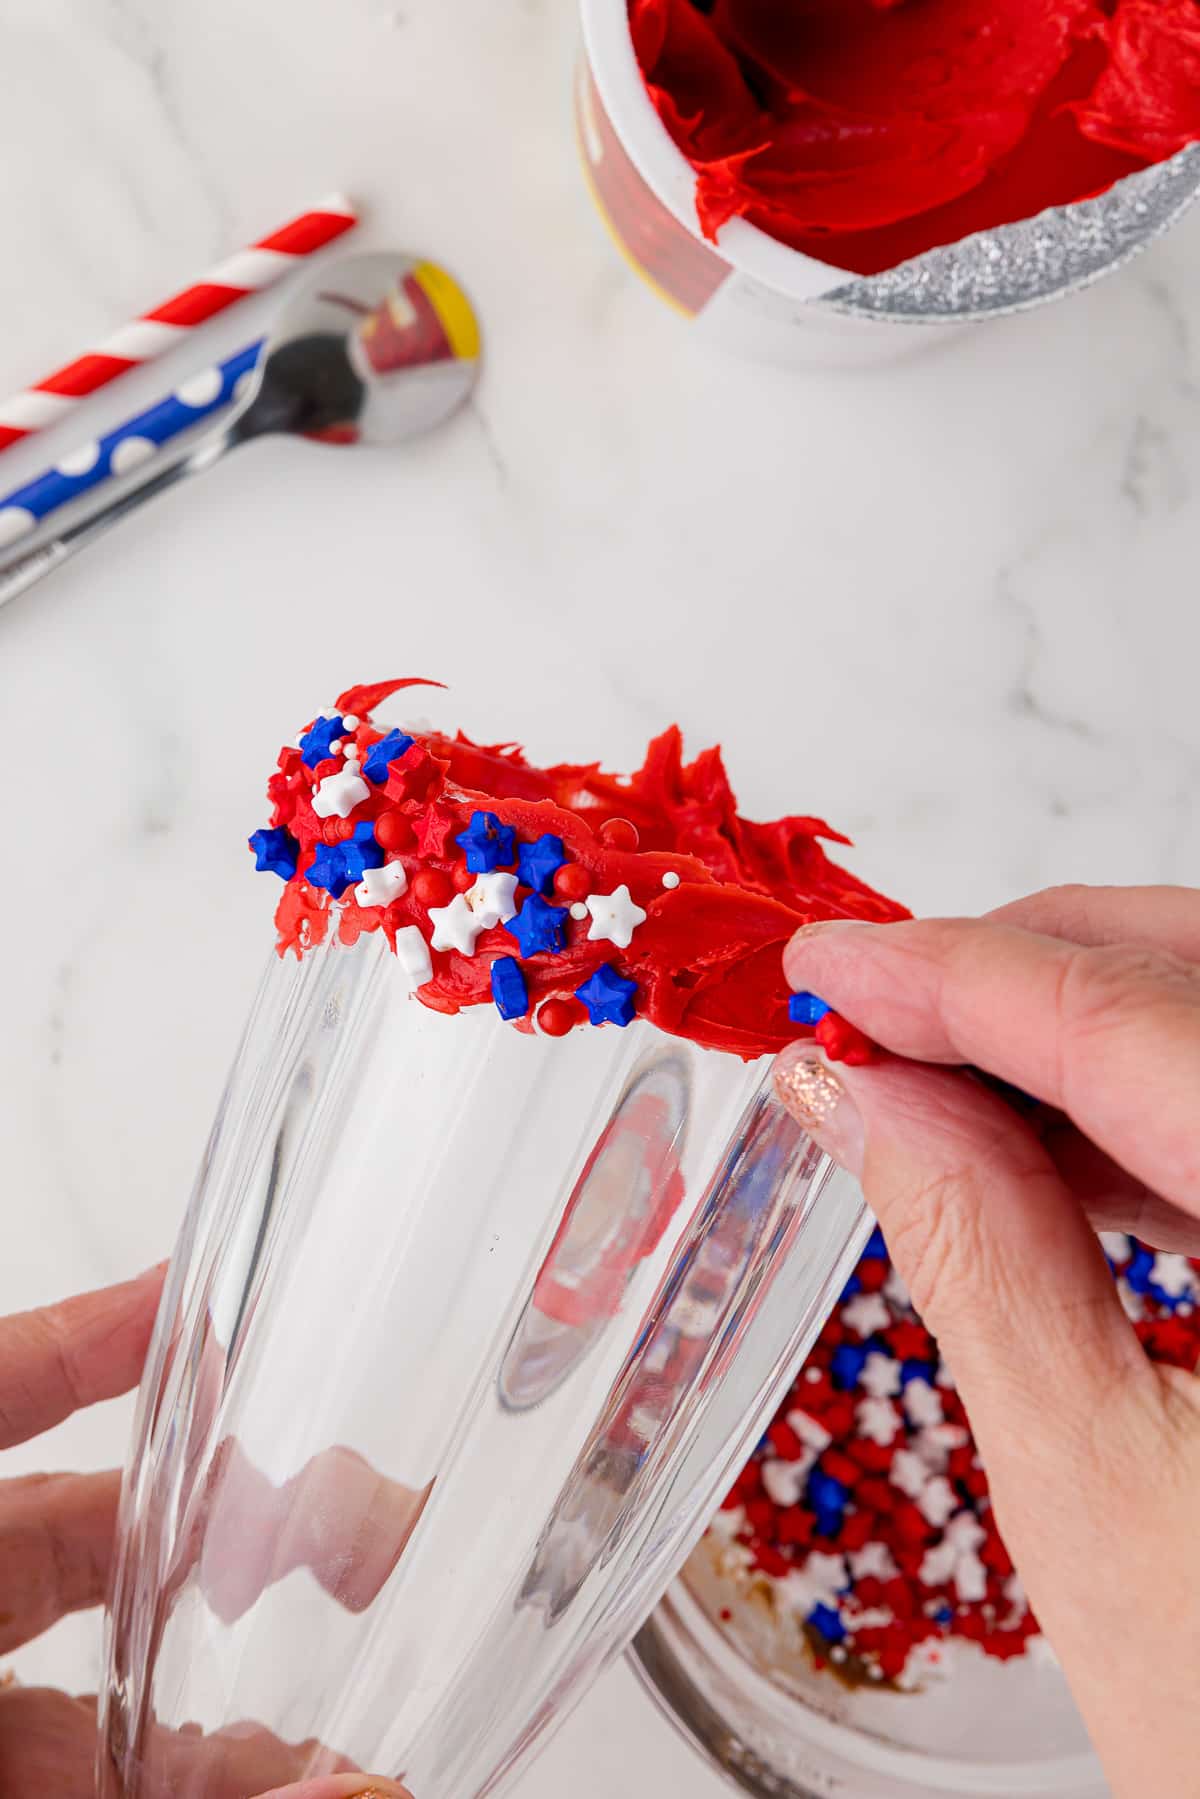 shake glass whose rim is frosted with red frosting, white and blue small candy stars being applied